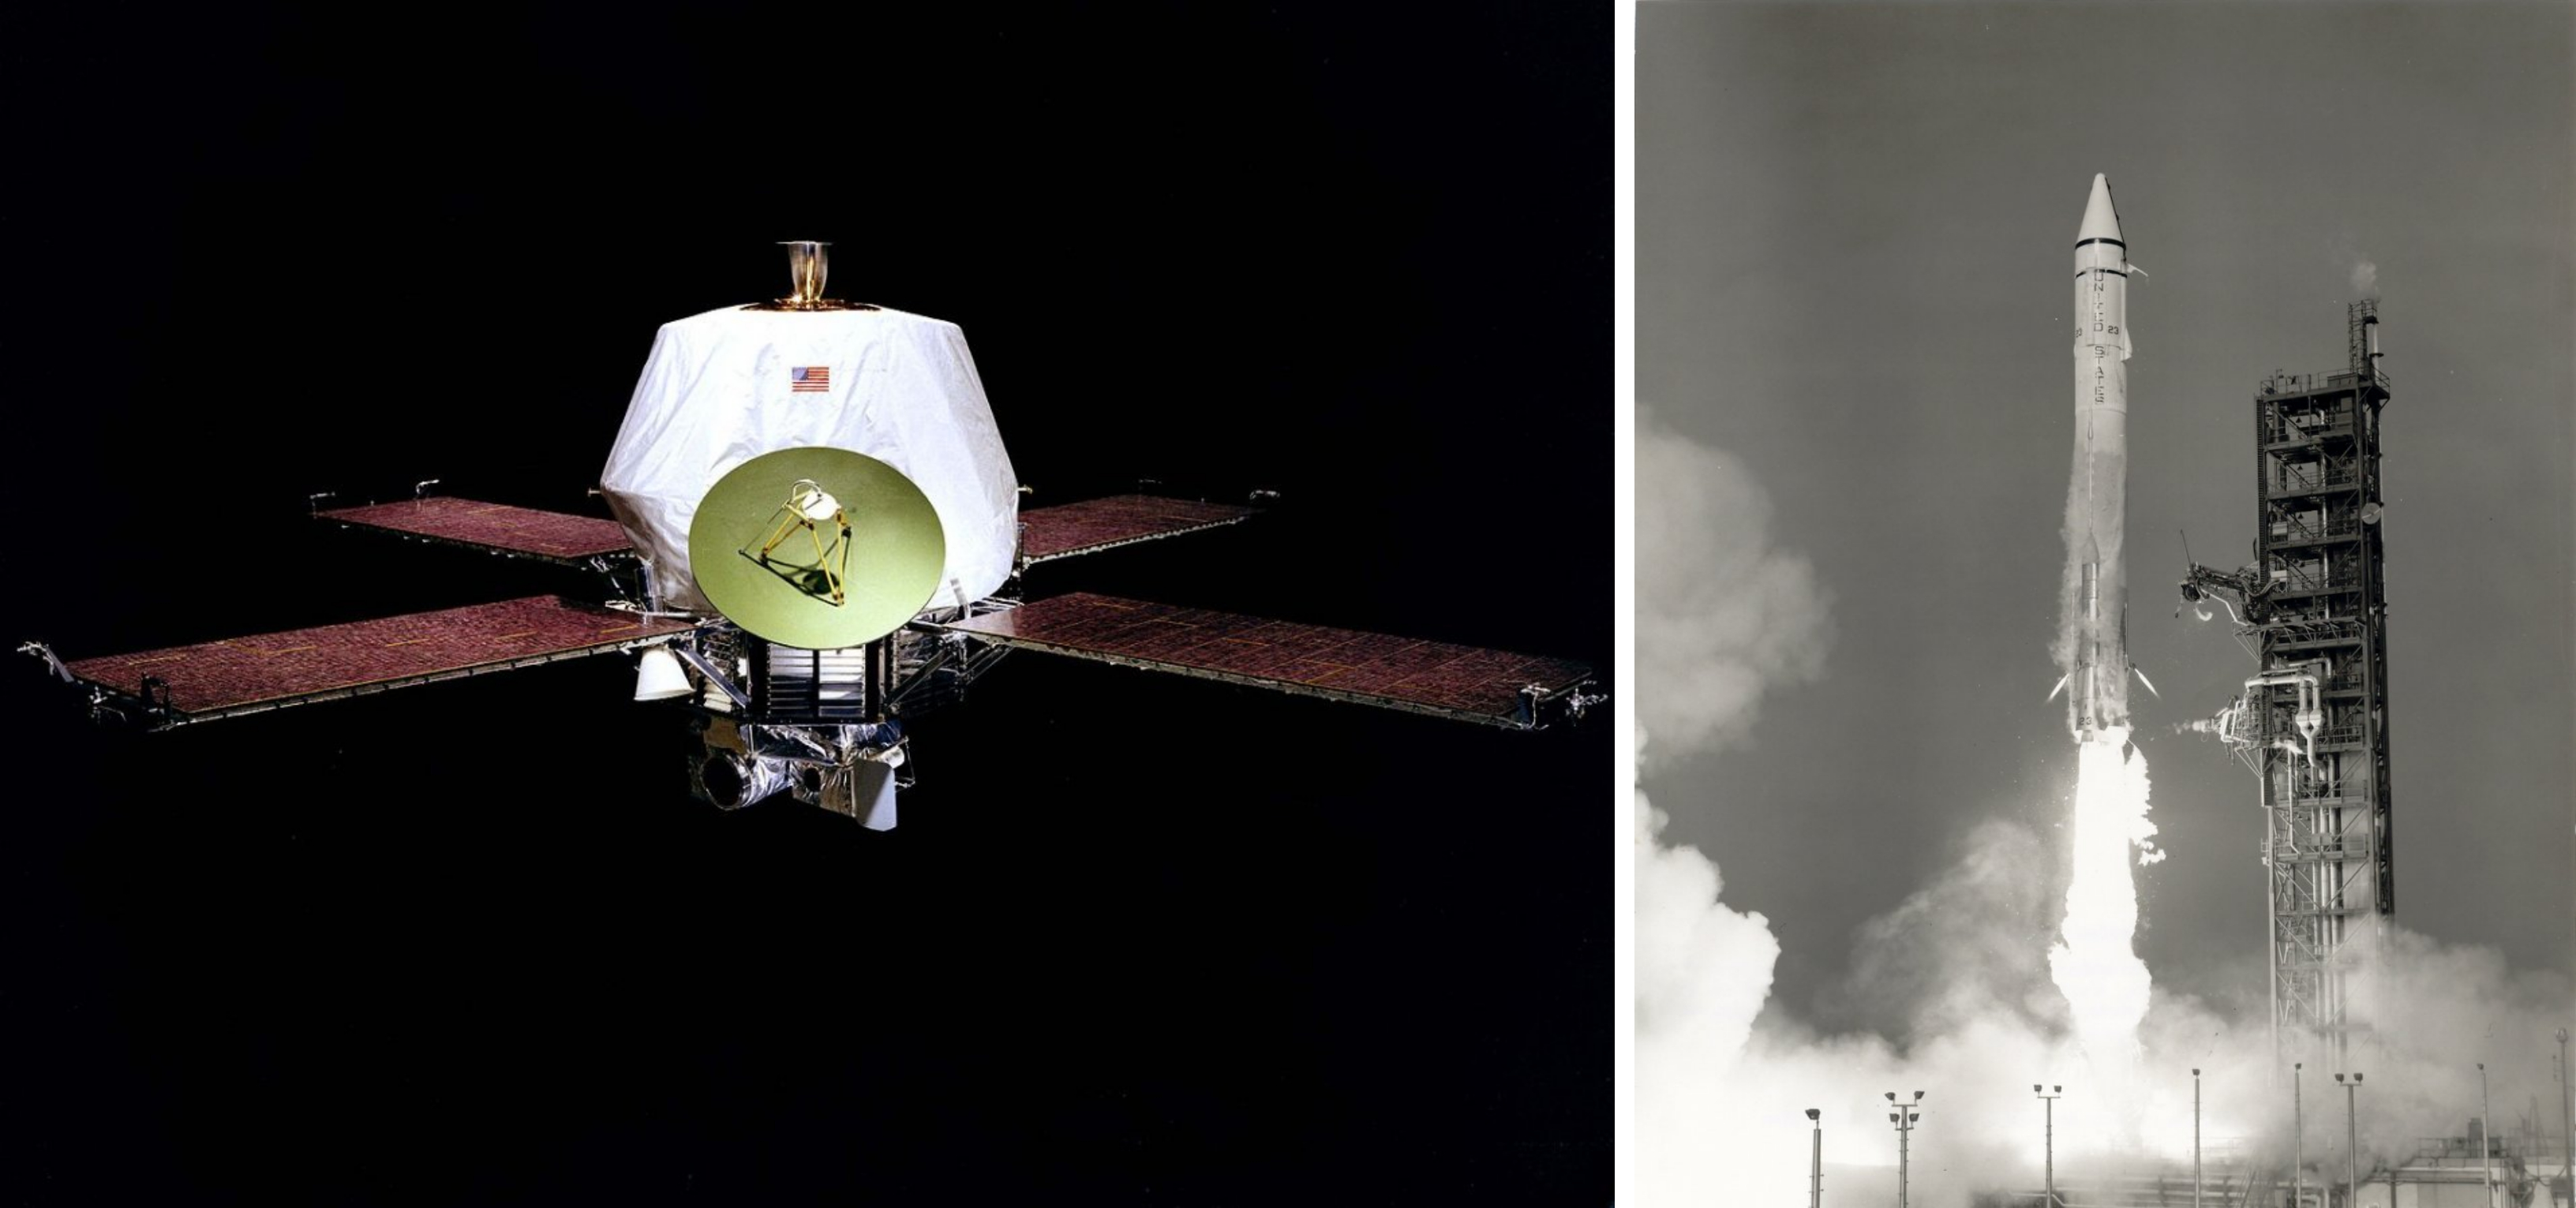 On the left, the Mariner 9 spacecraft. On the right, the Mariner 9 launch.